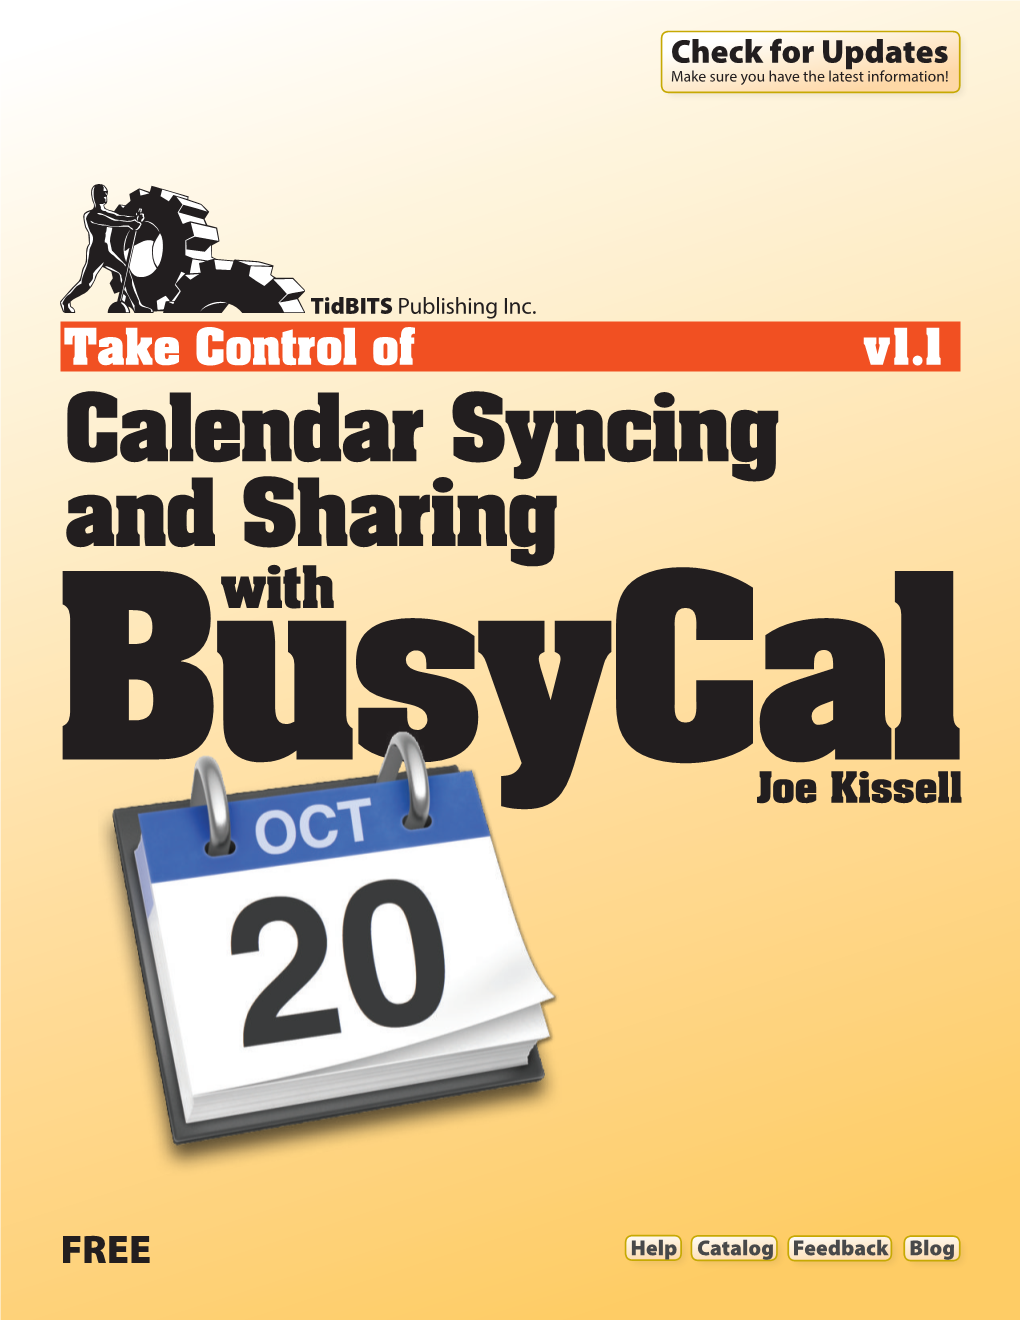 Take Control of Calendar Syncing and Sharing with Busycal (1.1)